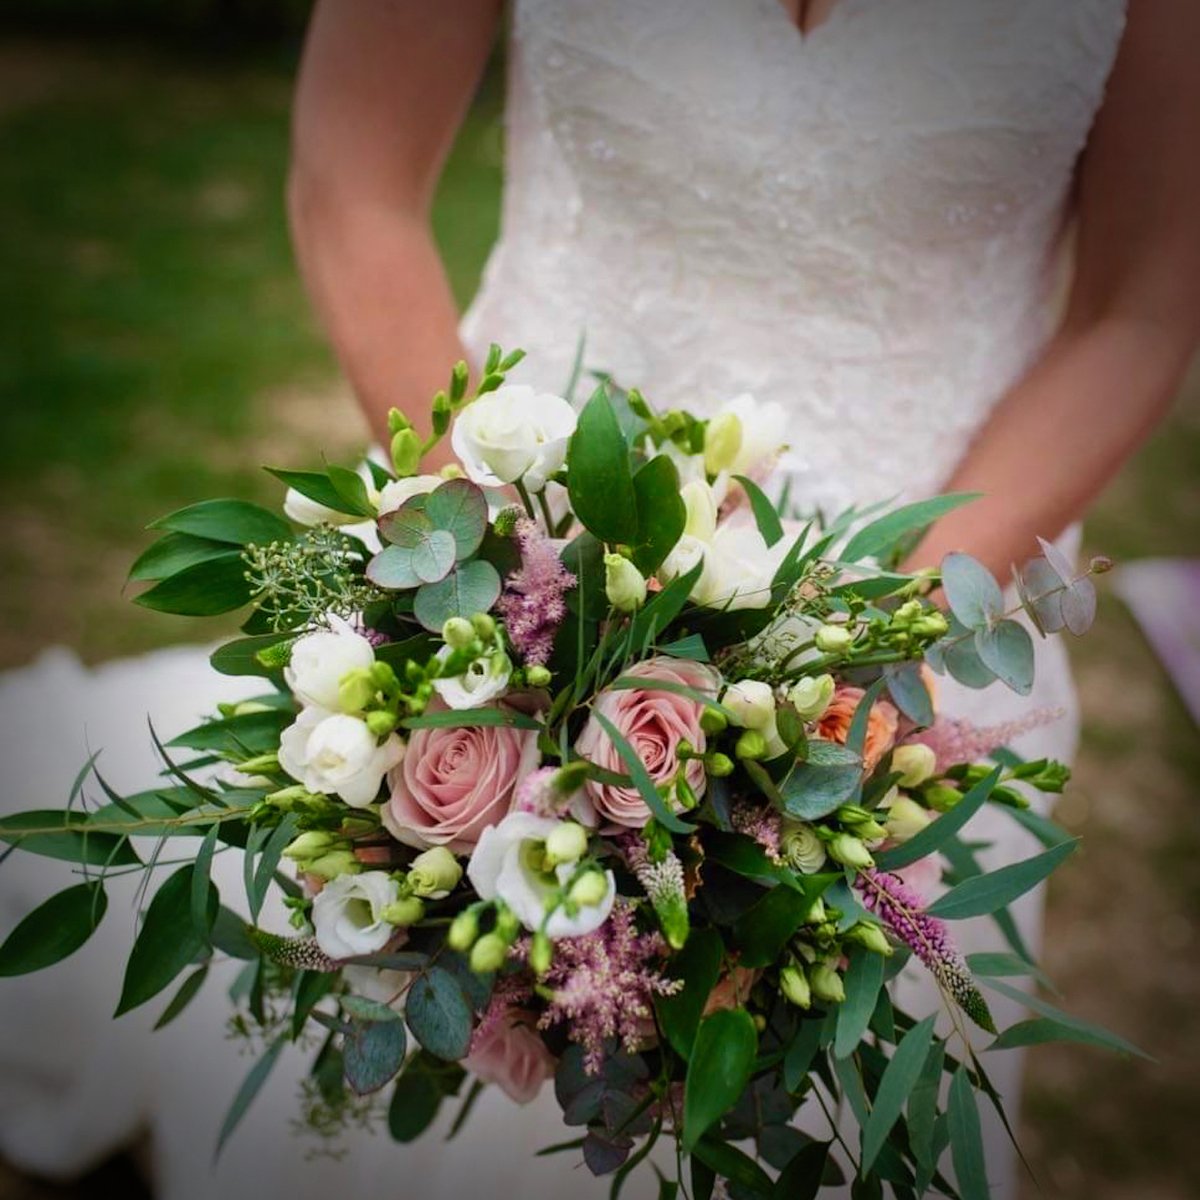 A popular unstructured, country style bridal bouquet 👰‍♀️
#WeddingCeremony #CeremonyFlowers #WeddingFlowers #WeddingFlorist #WeddingDayMemories #Hertfordshire #HemelHempstead #MaplesFlowers